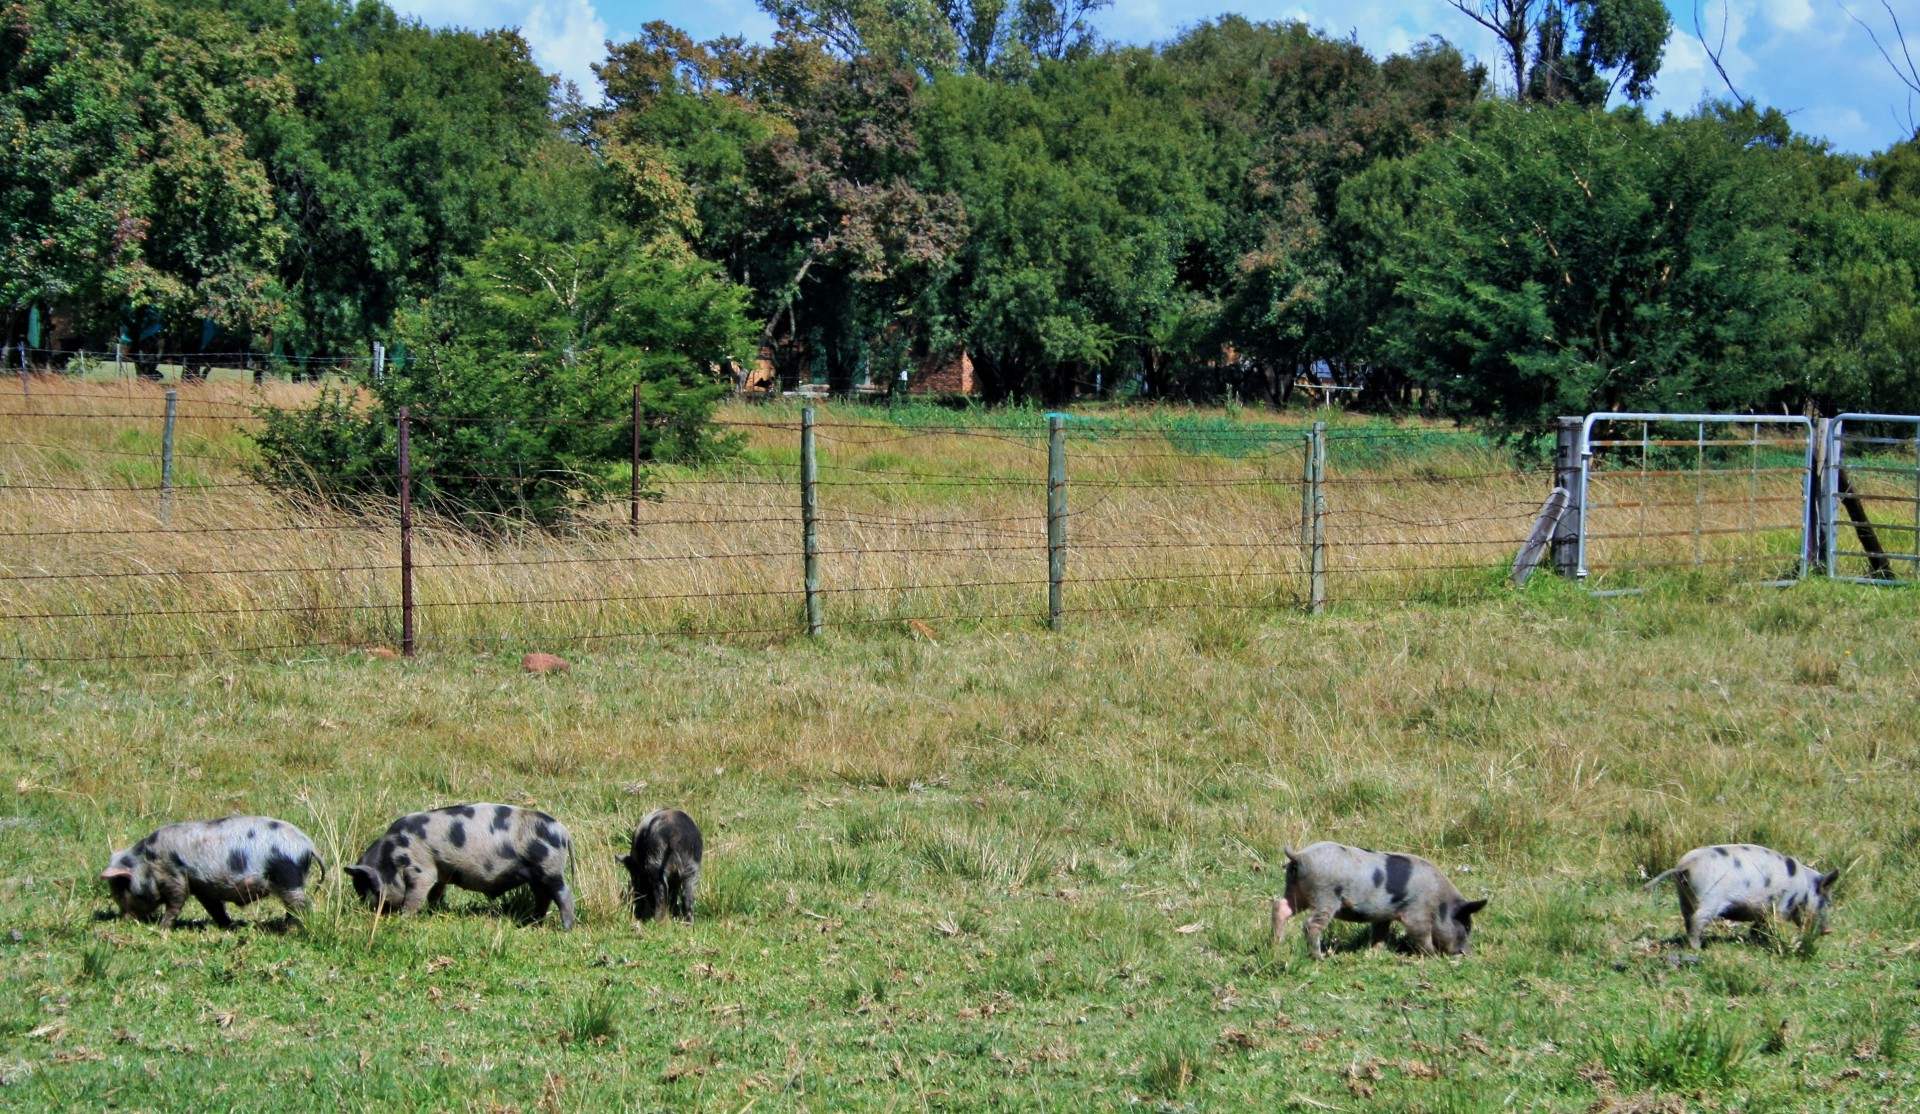 young pigs grazing